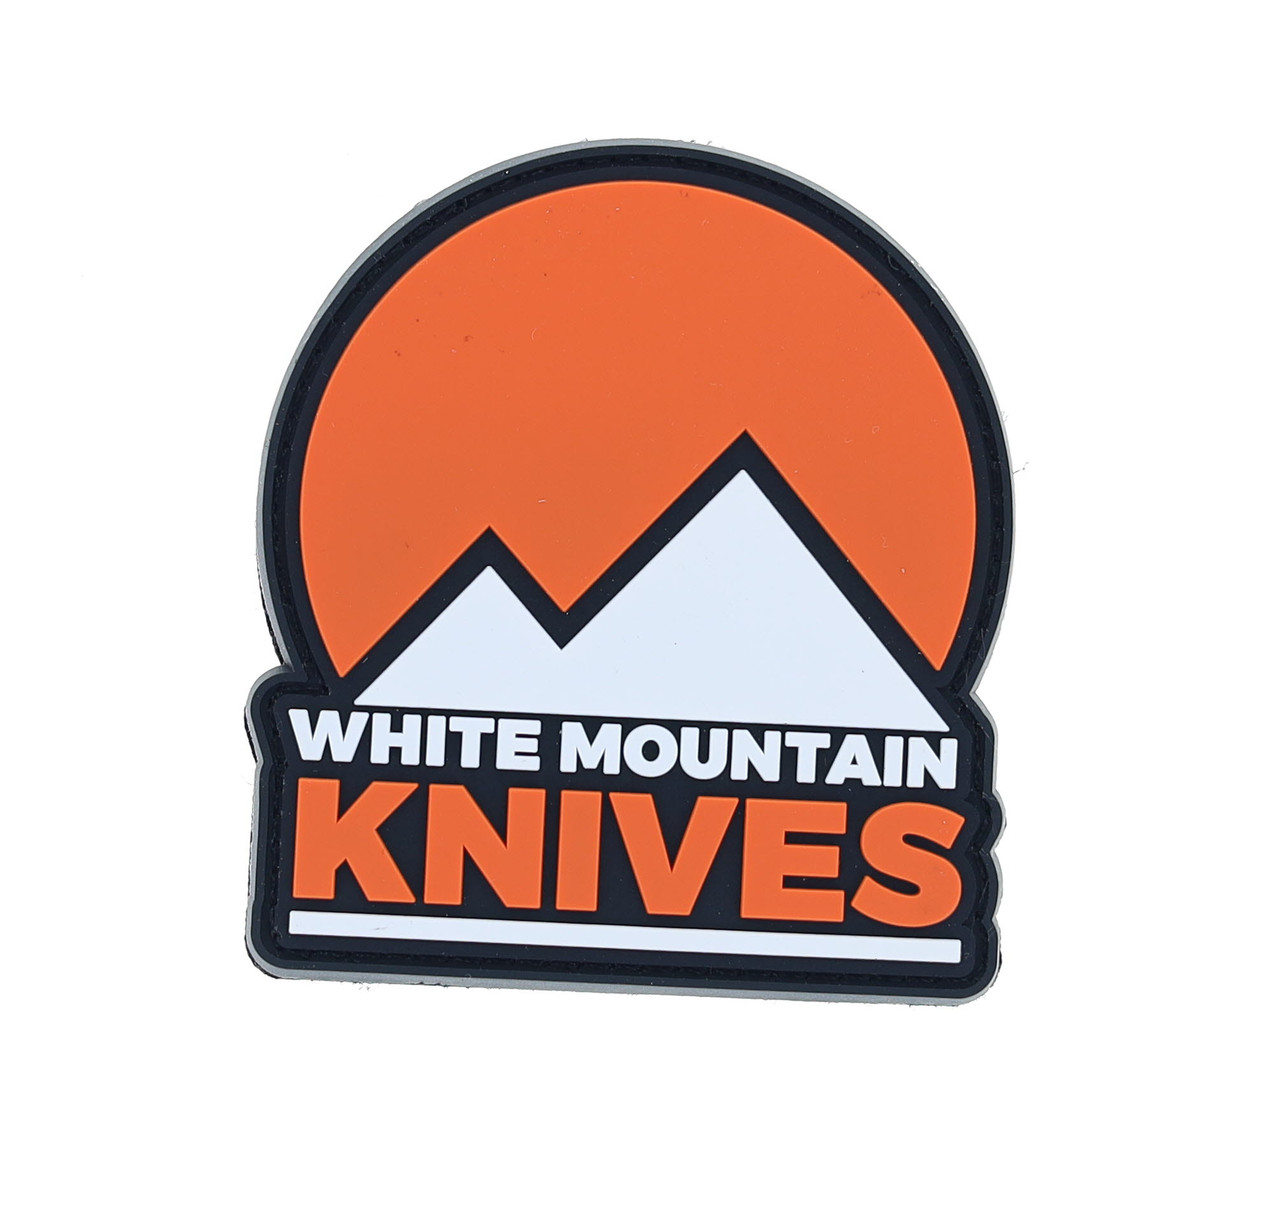 https://cdn11.bigcommerce.com/s-fedcb/images/stencil/1280x1280/products/24348/75786/WHITE_MOUNTAIN_KNIVES_PATCH01__75112.1694533404.jpg?c=2